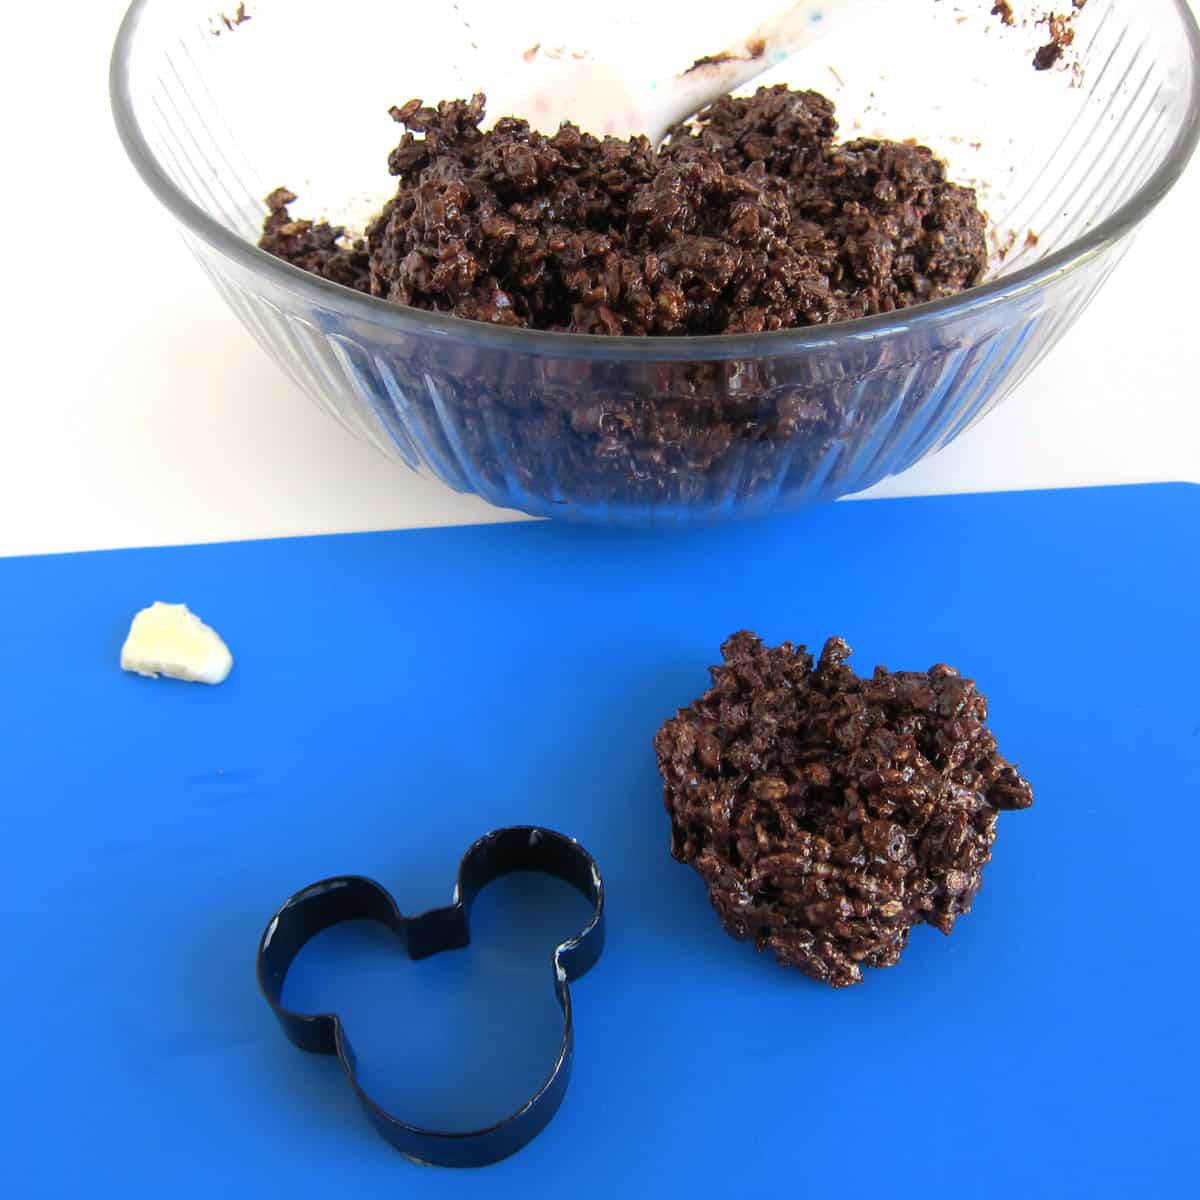 Mickey Mouse cookie cutter greased with butter next to chocolate rice krispie treat mixture